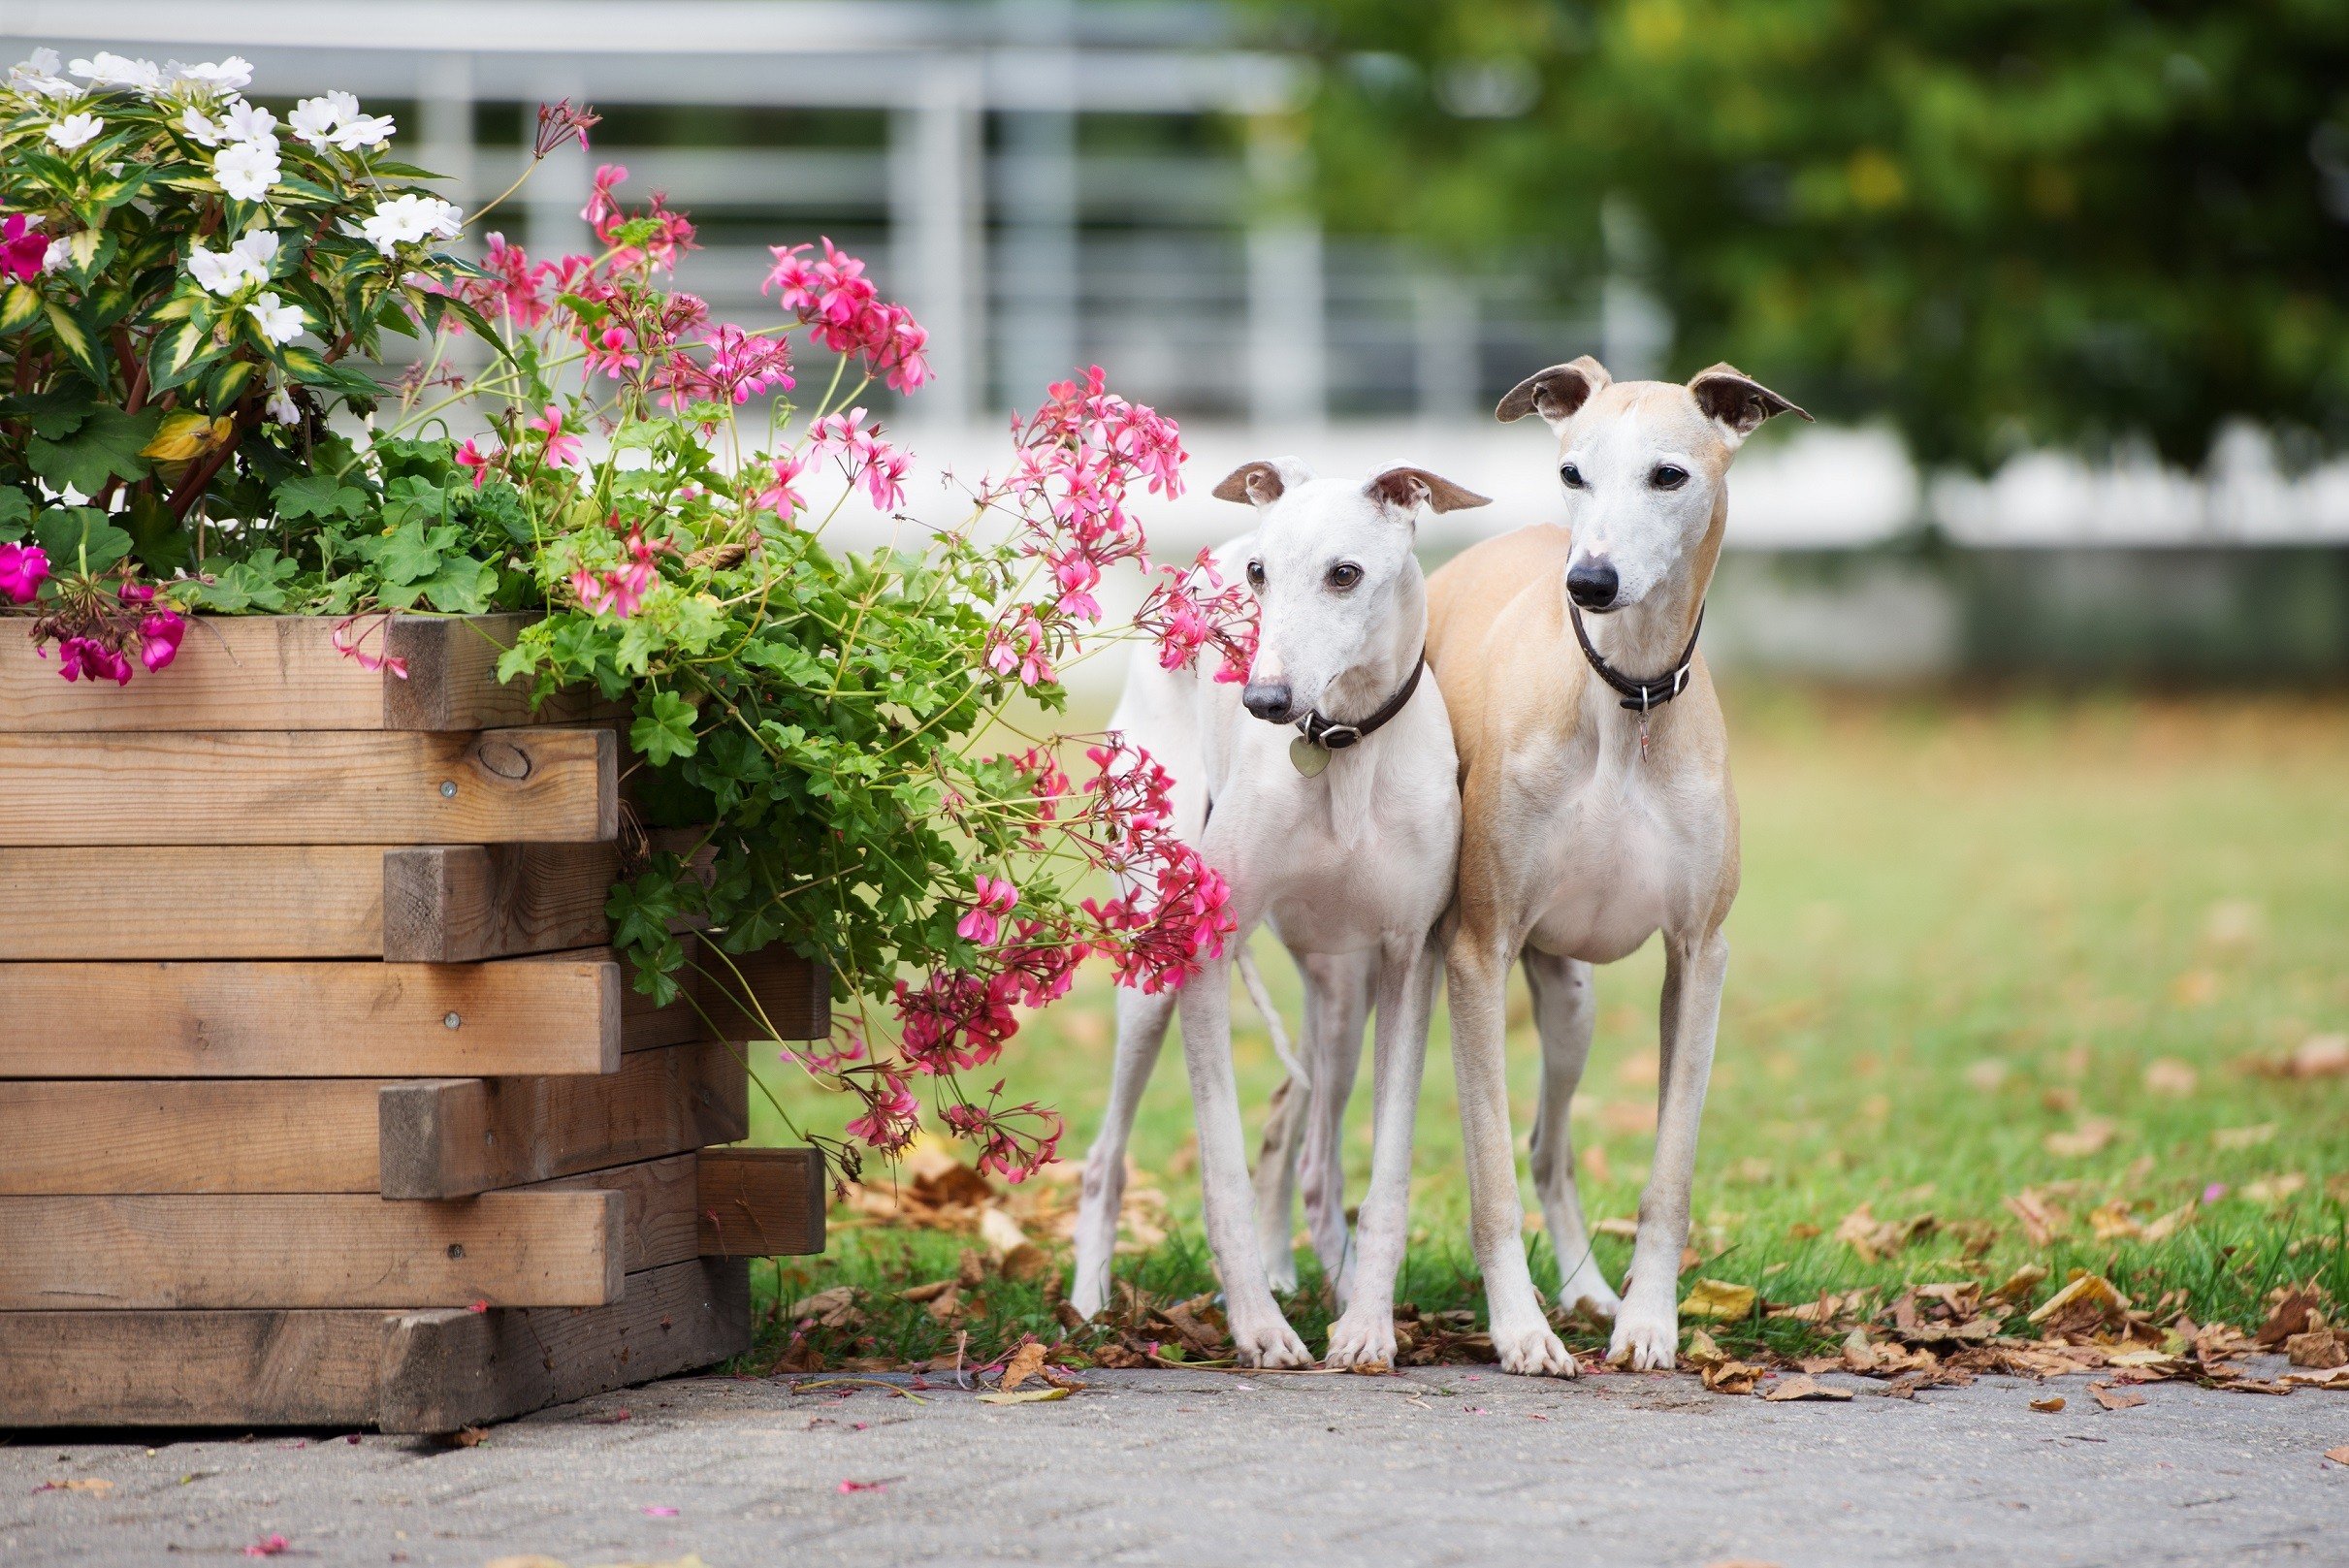 Two whippet dogs in a garden